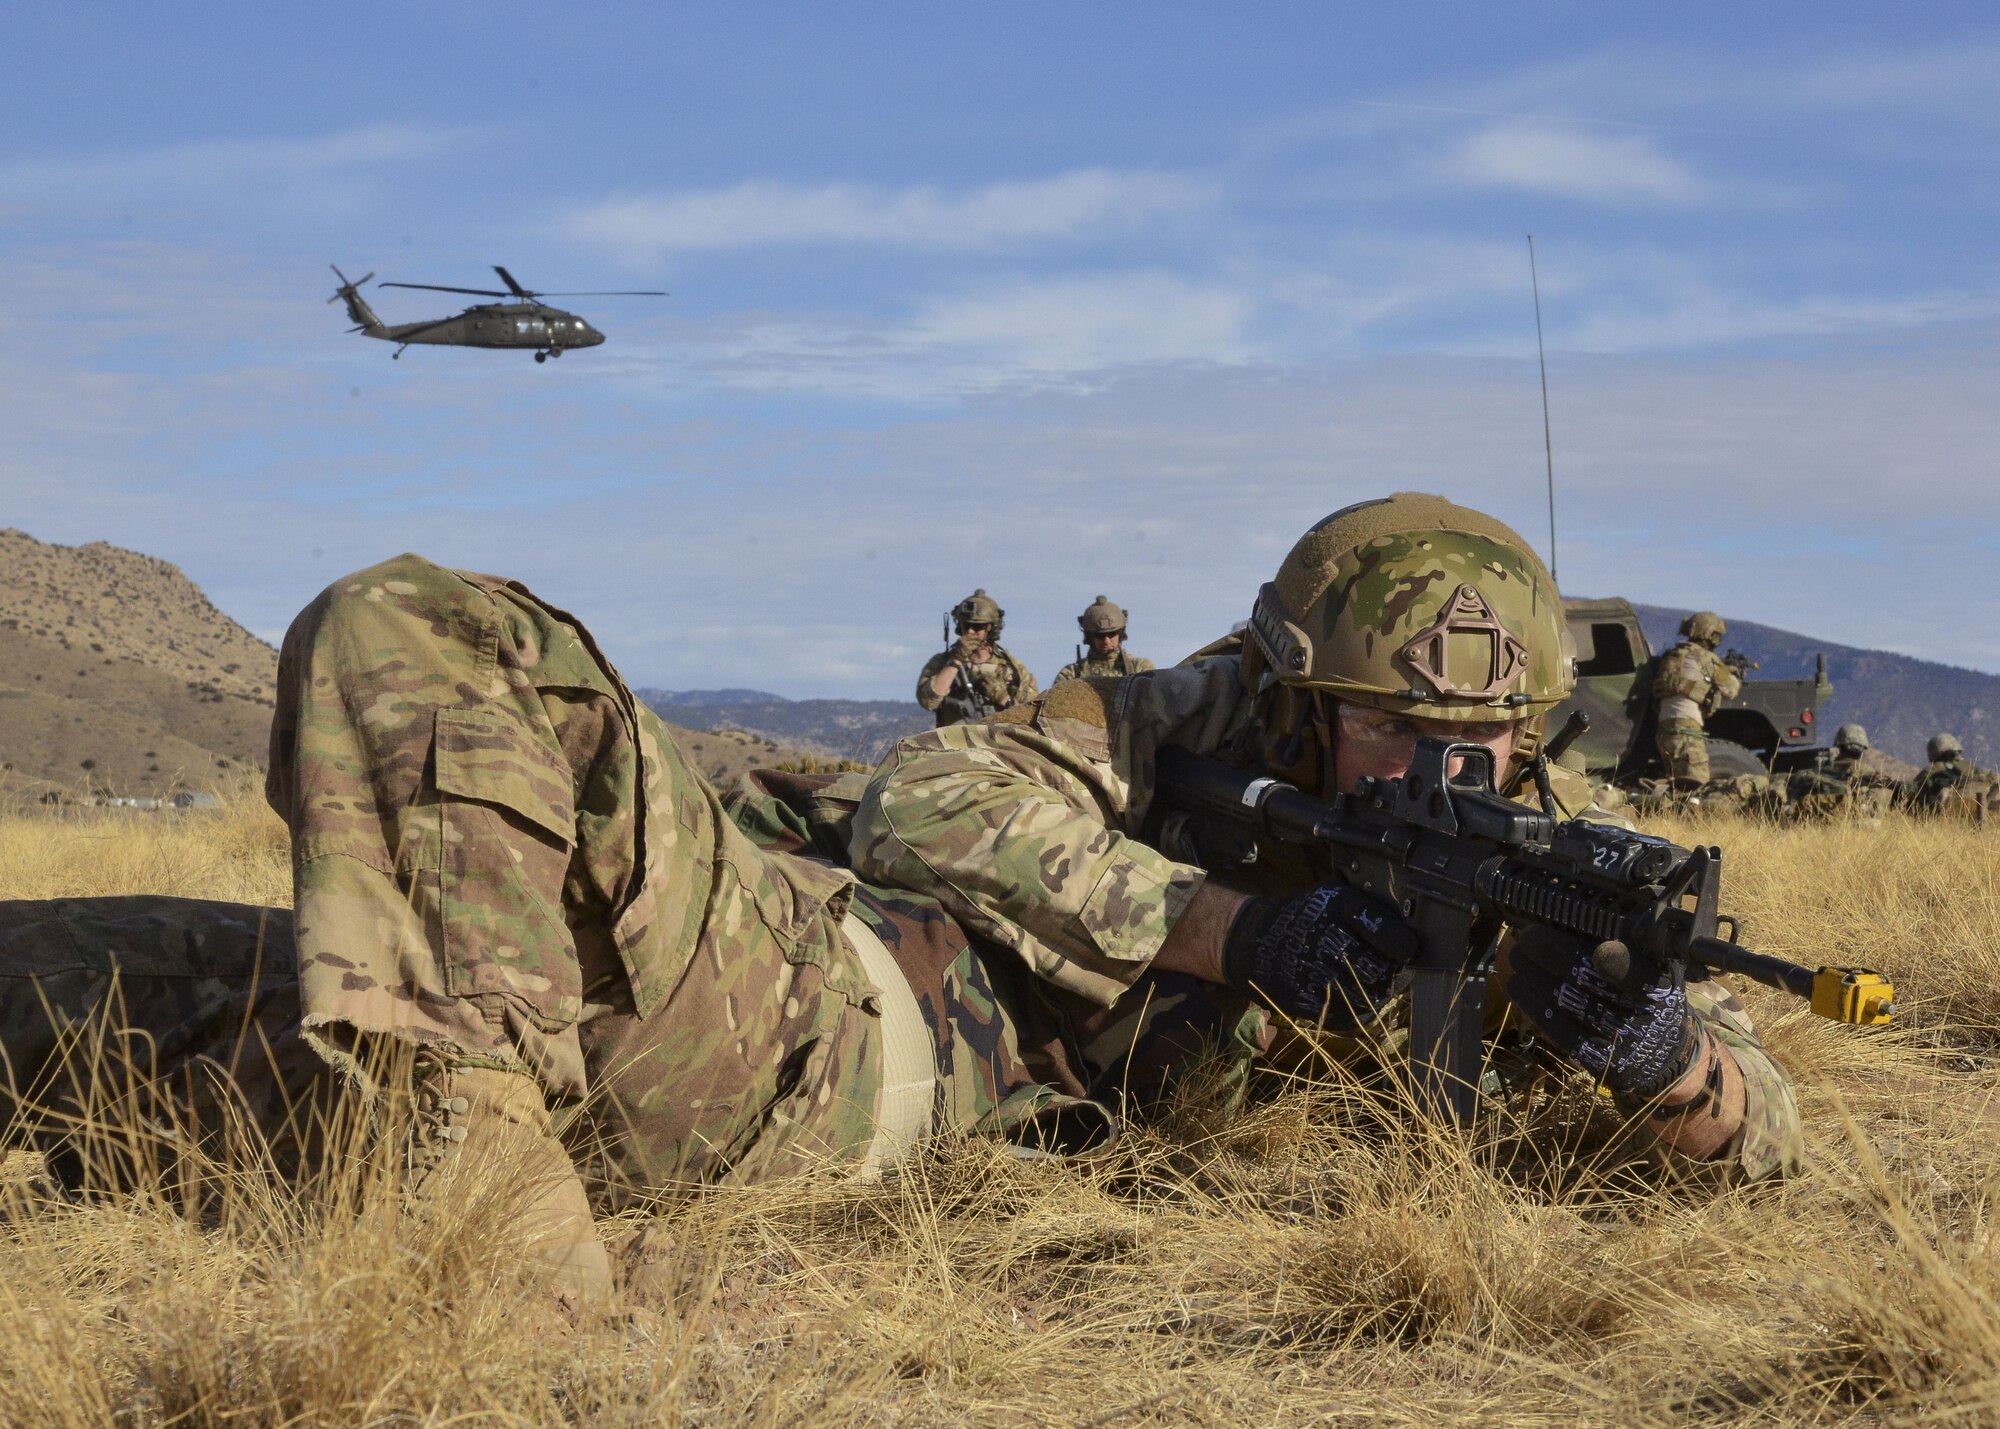 A student from the U.S. Air Force Pararescue School shields a wounded Airman while engaging in small arms fire during a mass casualty exercise Jan. 6, 2018 at Kirtland Air Force Base, N.M. The exercise, part of a sequence of full mission profiles pararescuemen and combat rescue officer students must face before graduation, included more than 100 Airmen and Soldiers. Members of the 3-501st Air Assault Brigade from Fort Bliss, Texas, provided the air component with UH-60 Blackhawk helicopters. (U.S. Air Force photo by Jim Fisher)